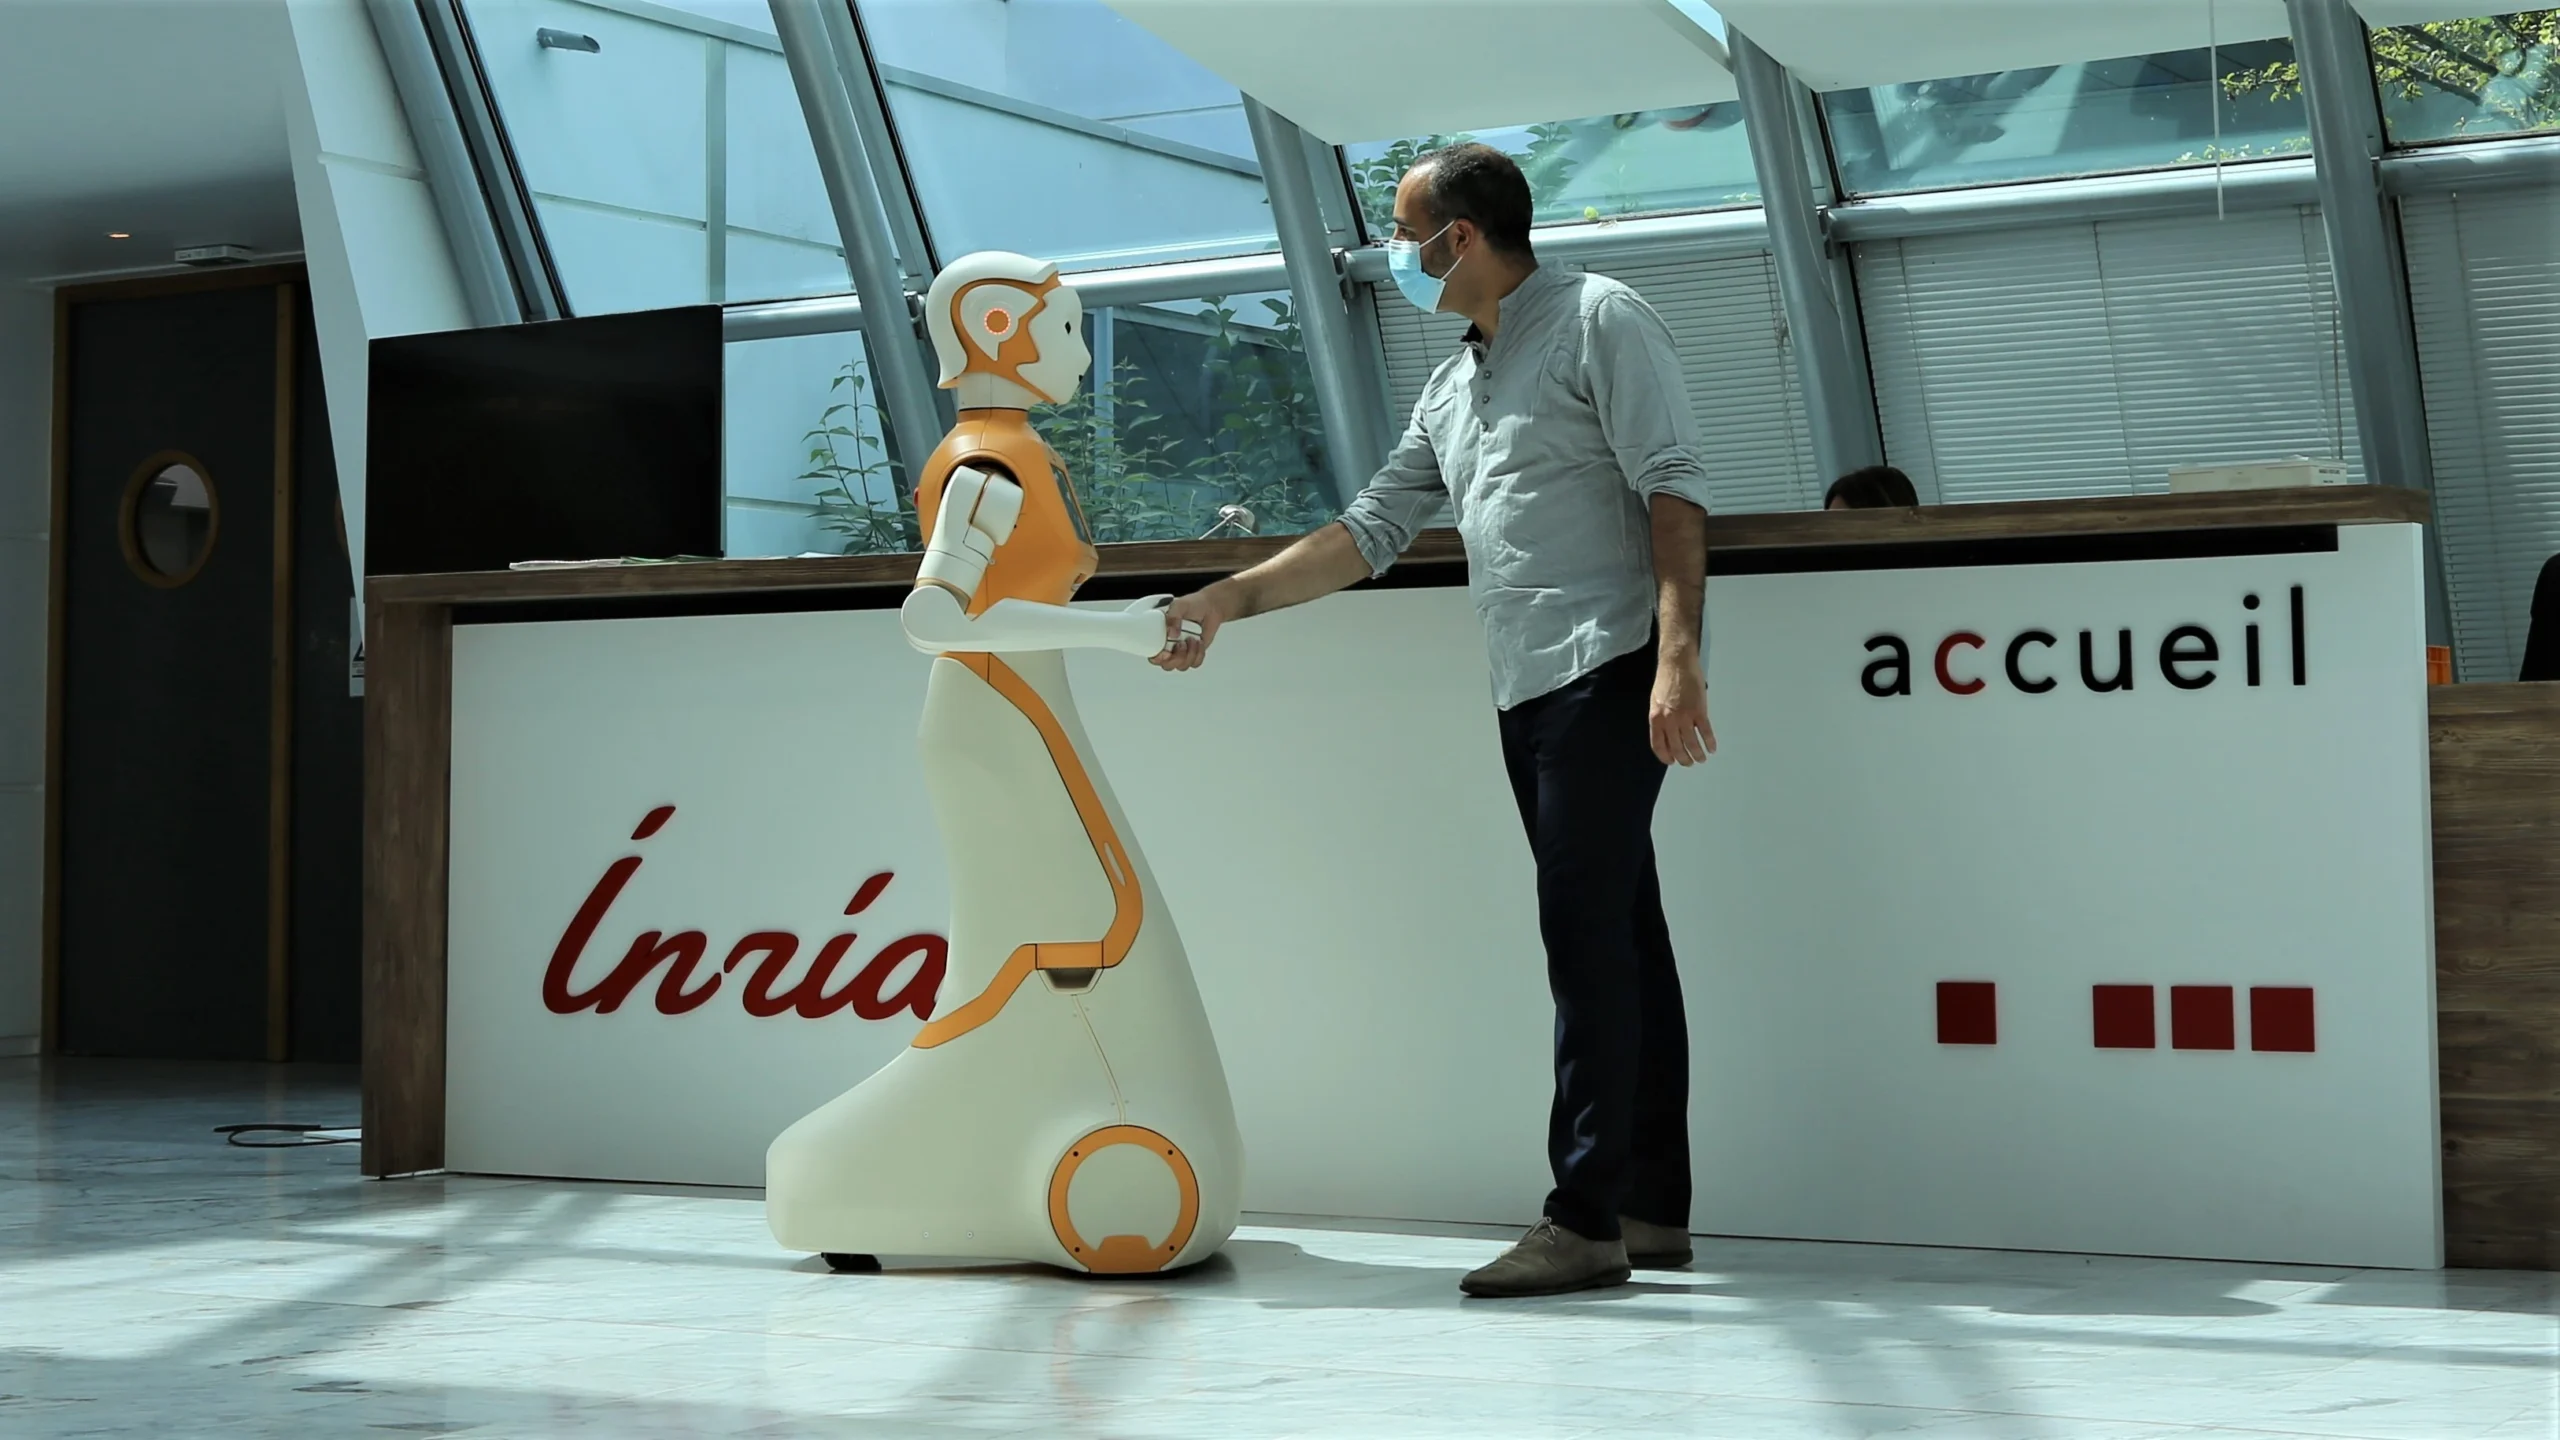 A man in a grey shirt and face mask is shaking hands with a humanoid robot named ARI in a modern lobby. The robot is white and orange, designed with a sleek, futuristic aesthetic. The background features a reception desk with the logo 'Inria' and a glass ceiling that lets in natural light.